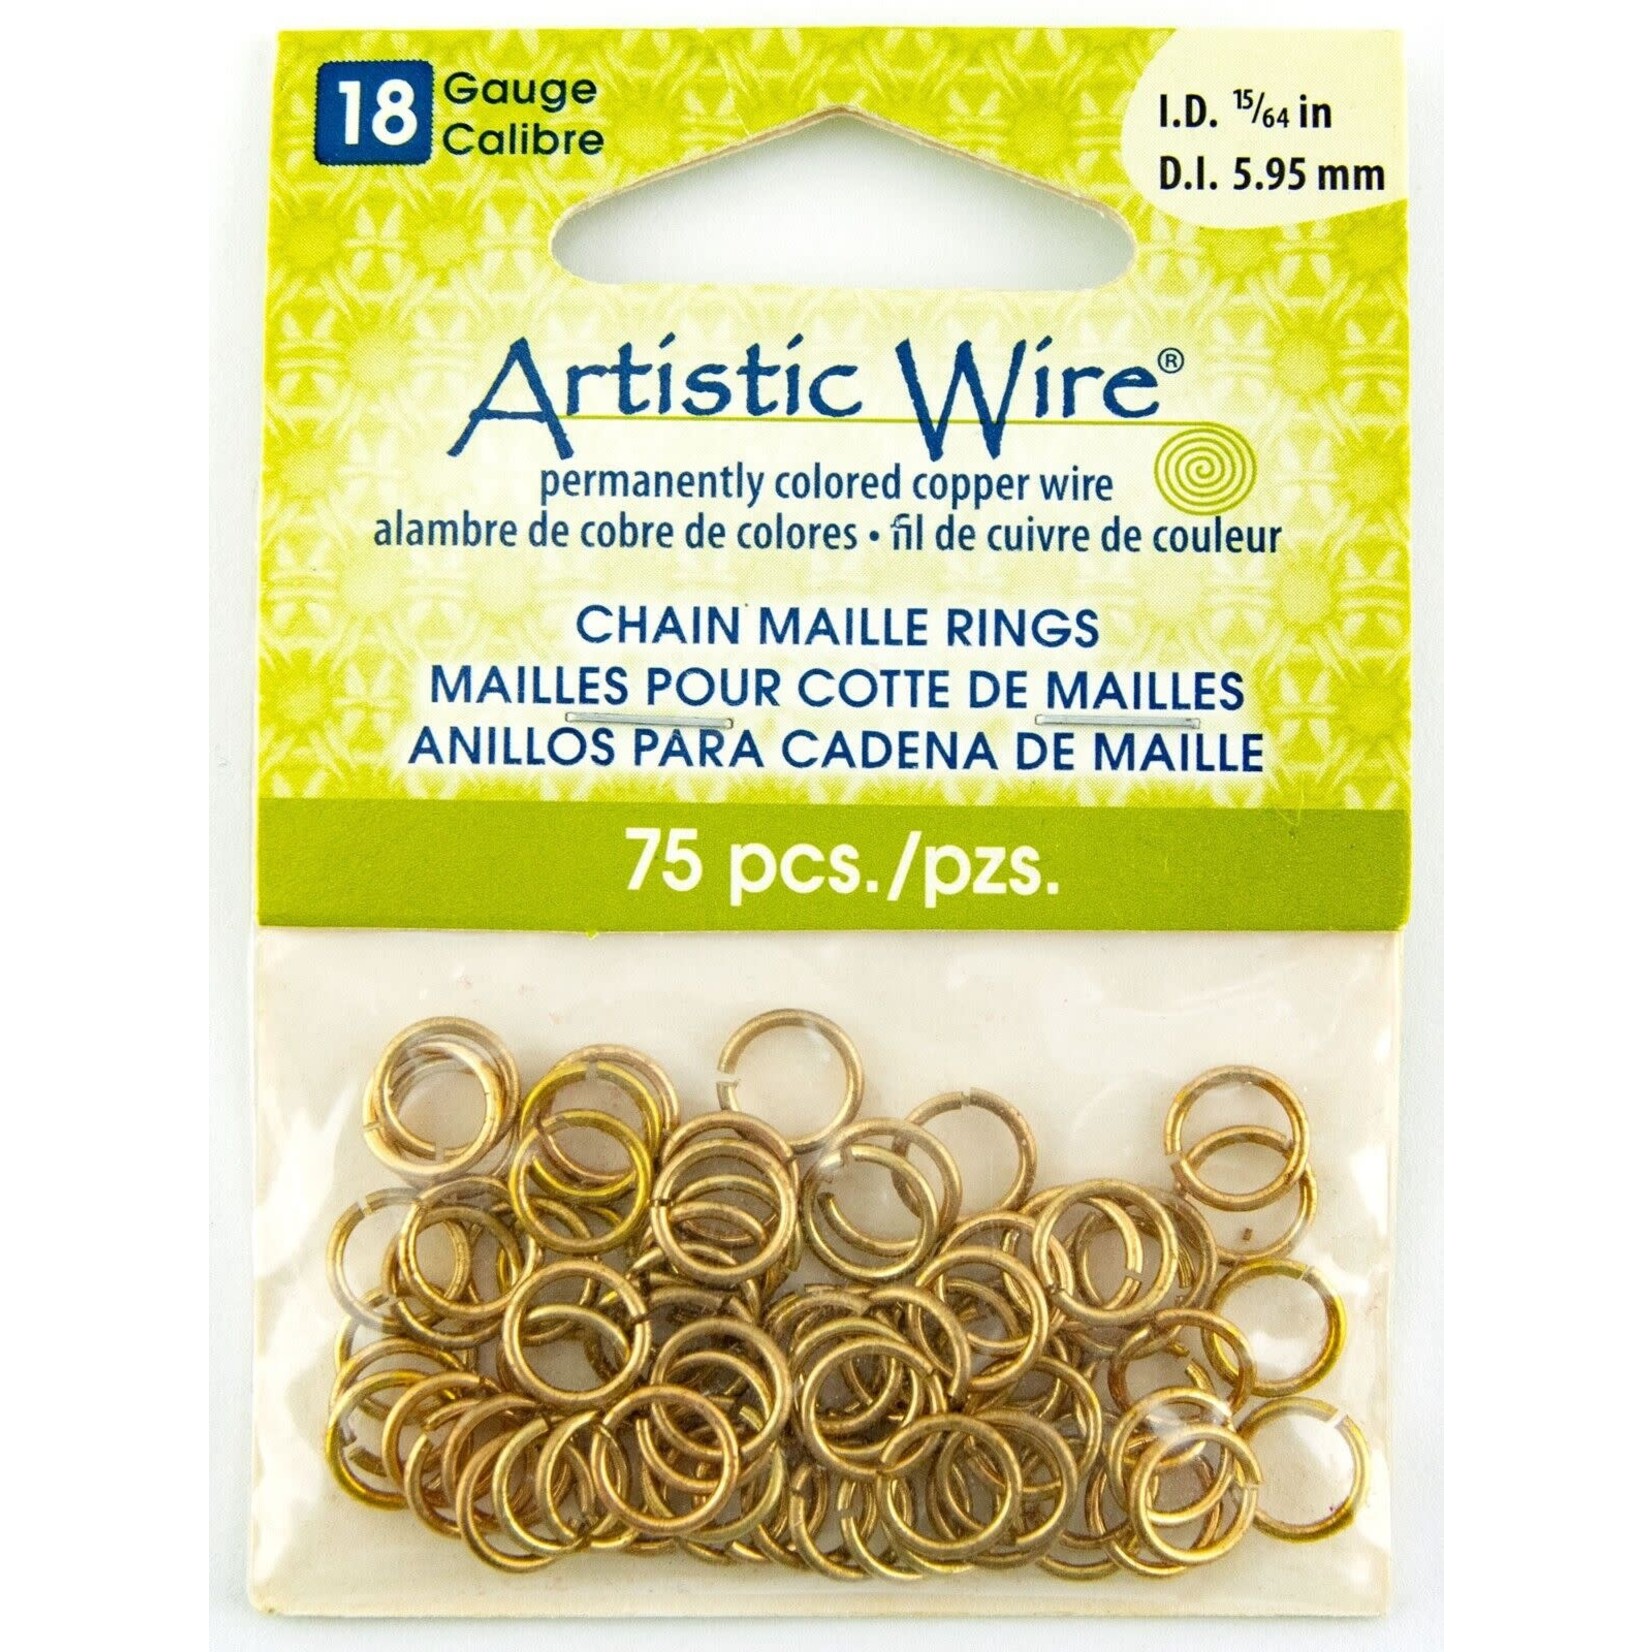 Artistic Wire Chain Maille Rings 6mm 18g Non-Tarnish Brass Plated - 100 pieces